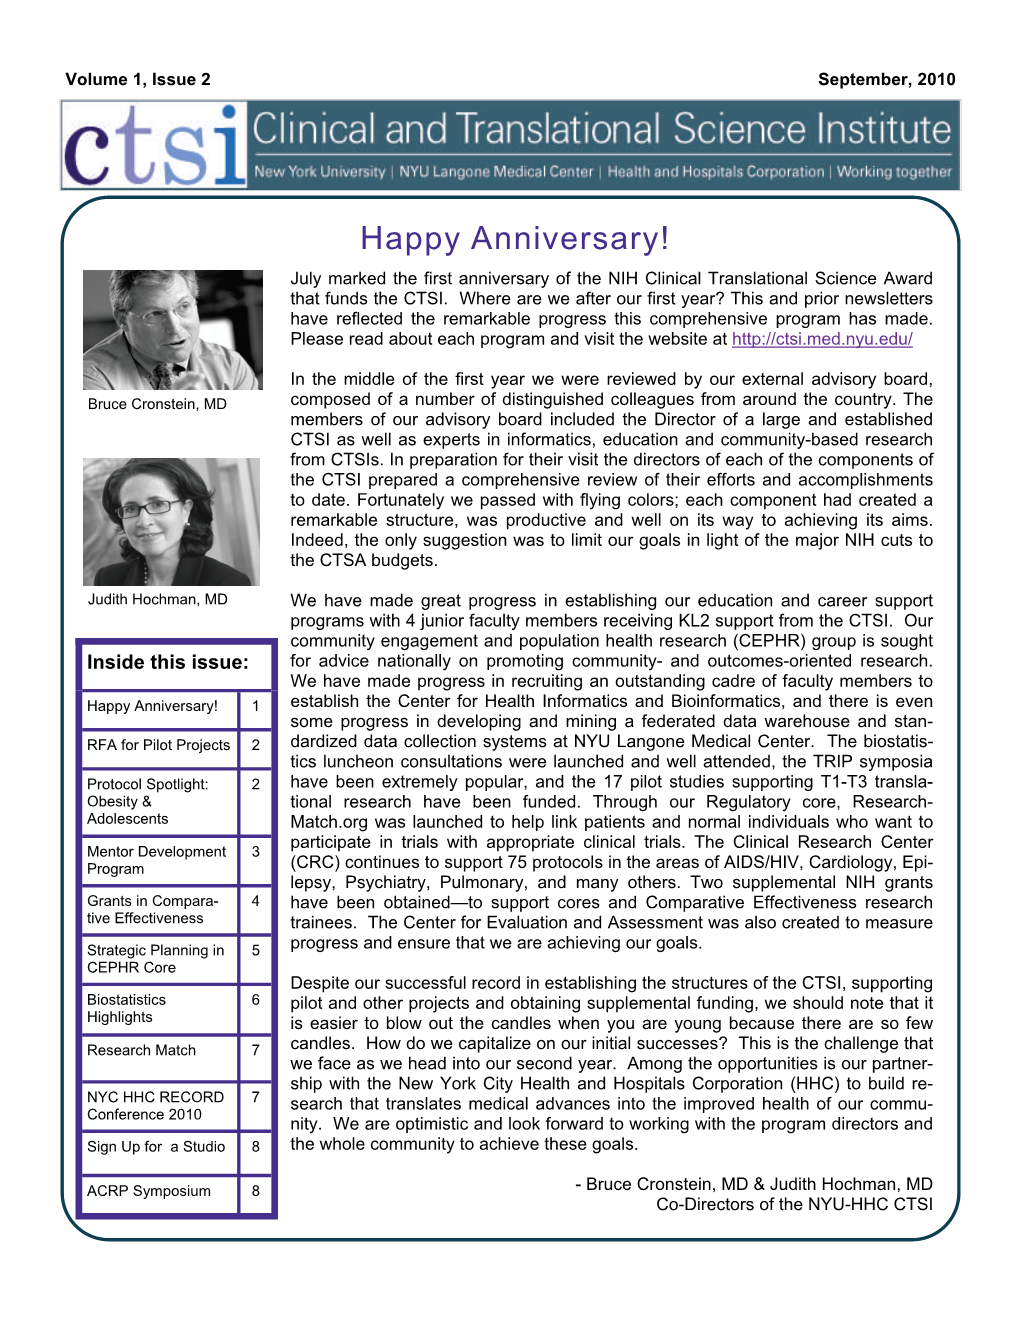 Happy Anniversary! July Marked the First Anniversary of the NIH Clinical Translational Science Award That Funds the CTSI